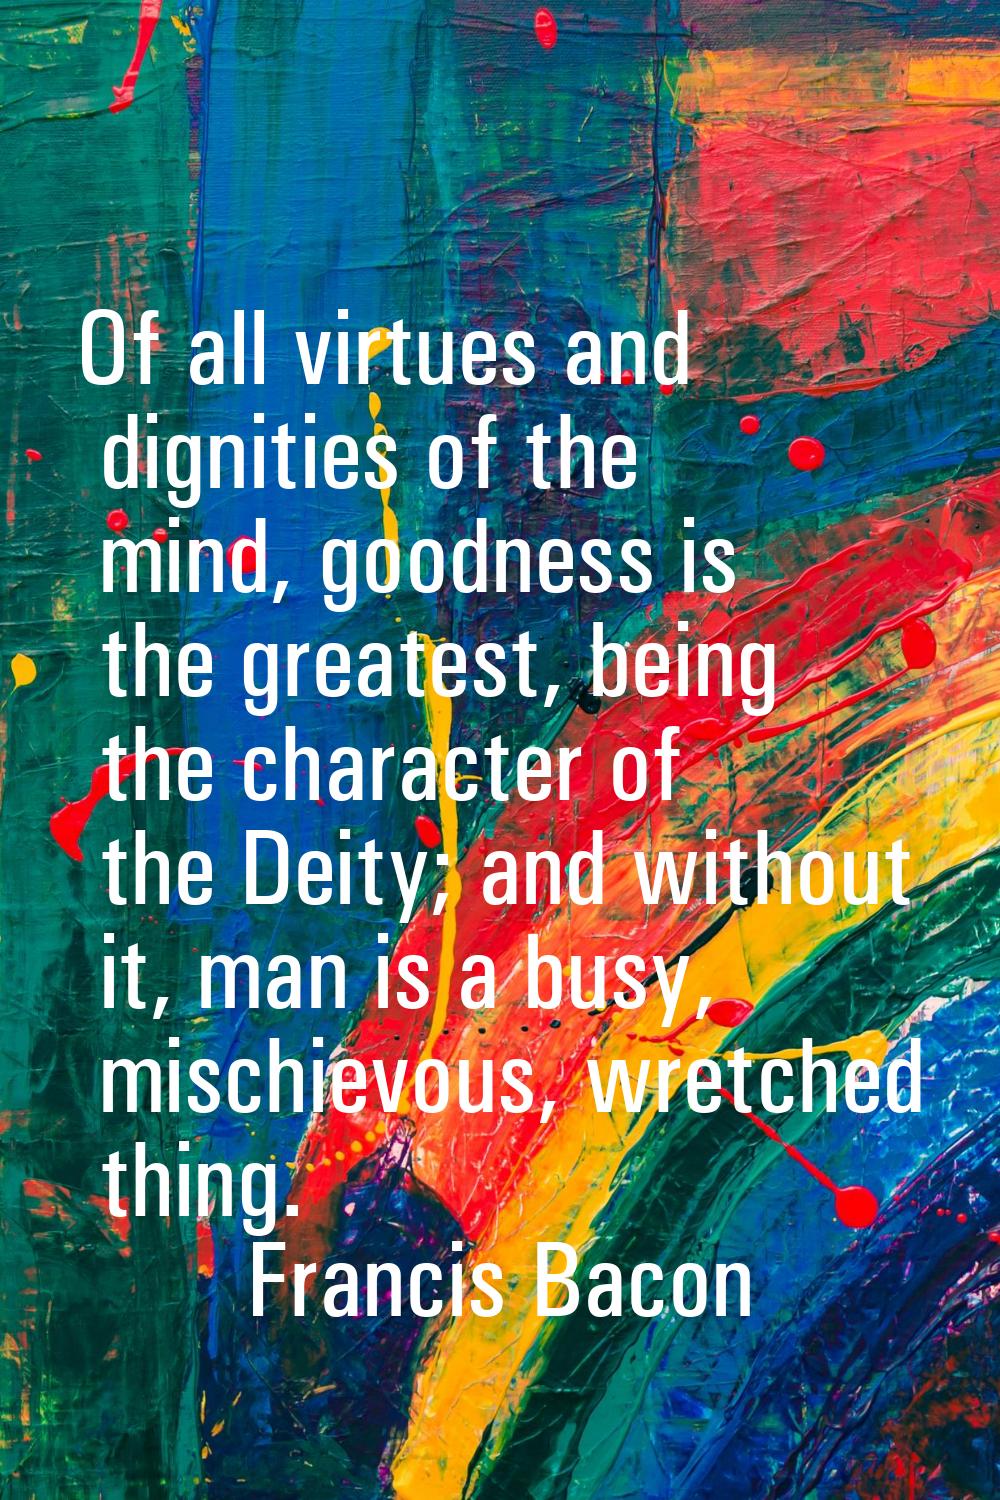 Of all virtues and dignities of the mind, goodness is the greatest, being the character of the Deit